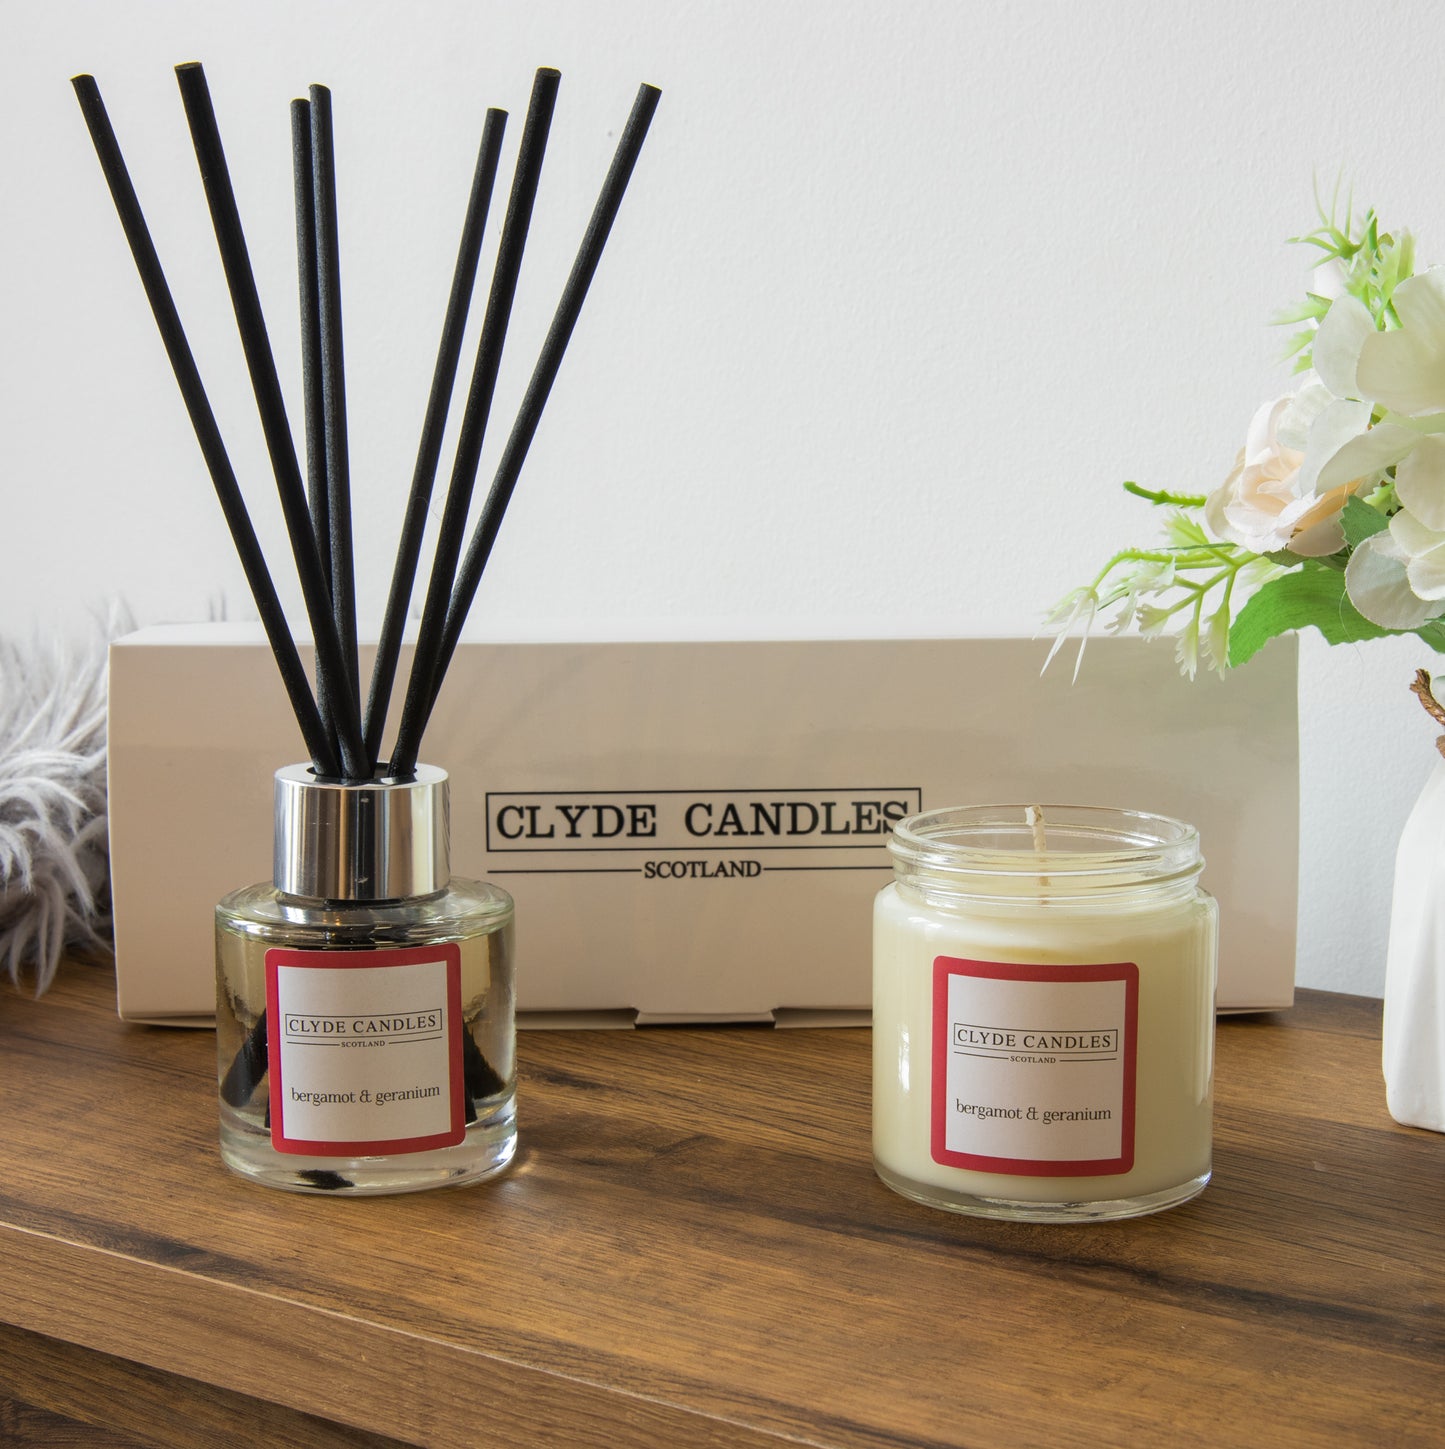 bergamot and geranium candle jar and small diffuser gift set , clyde candle scotland